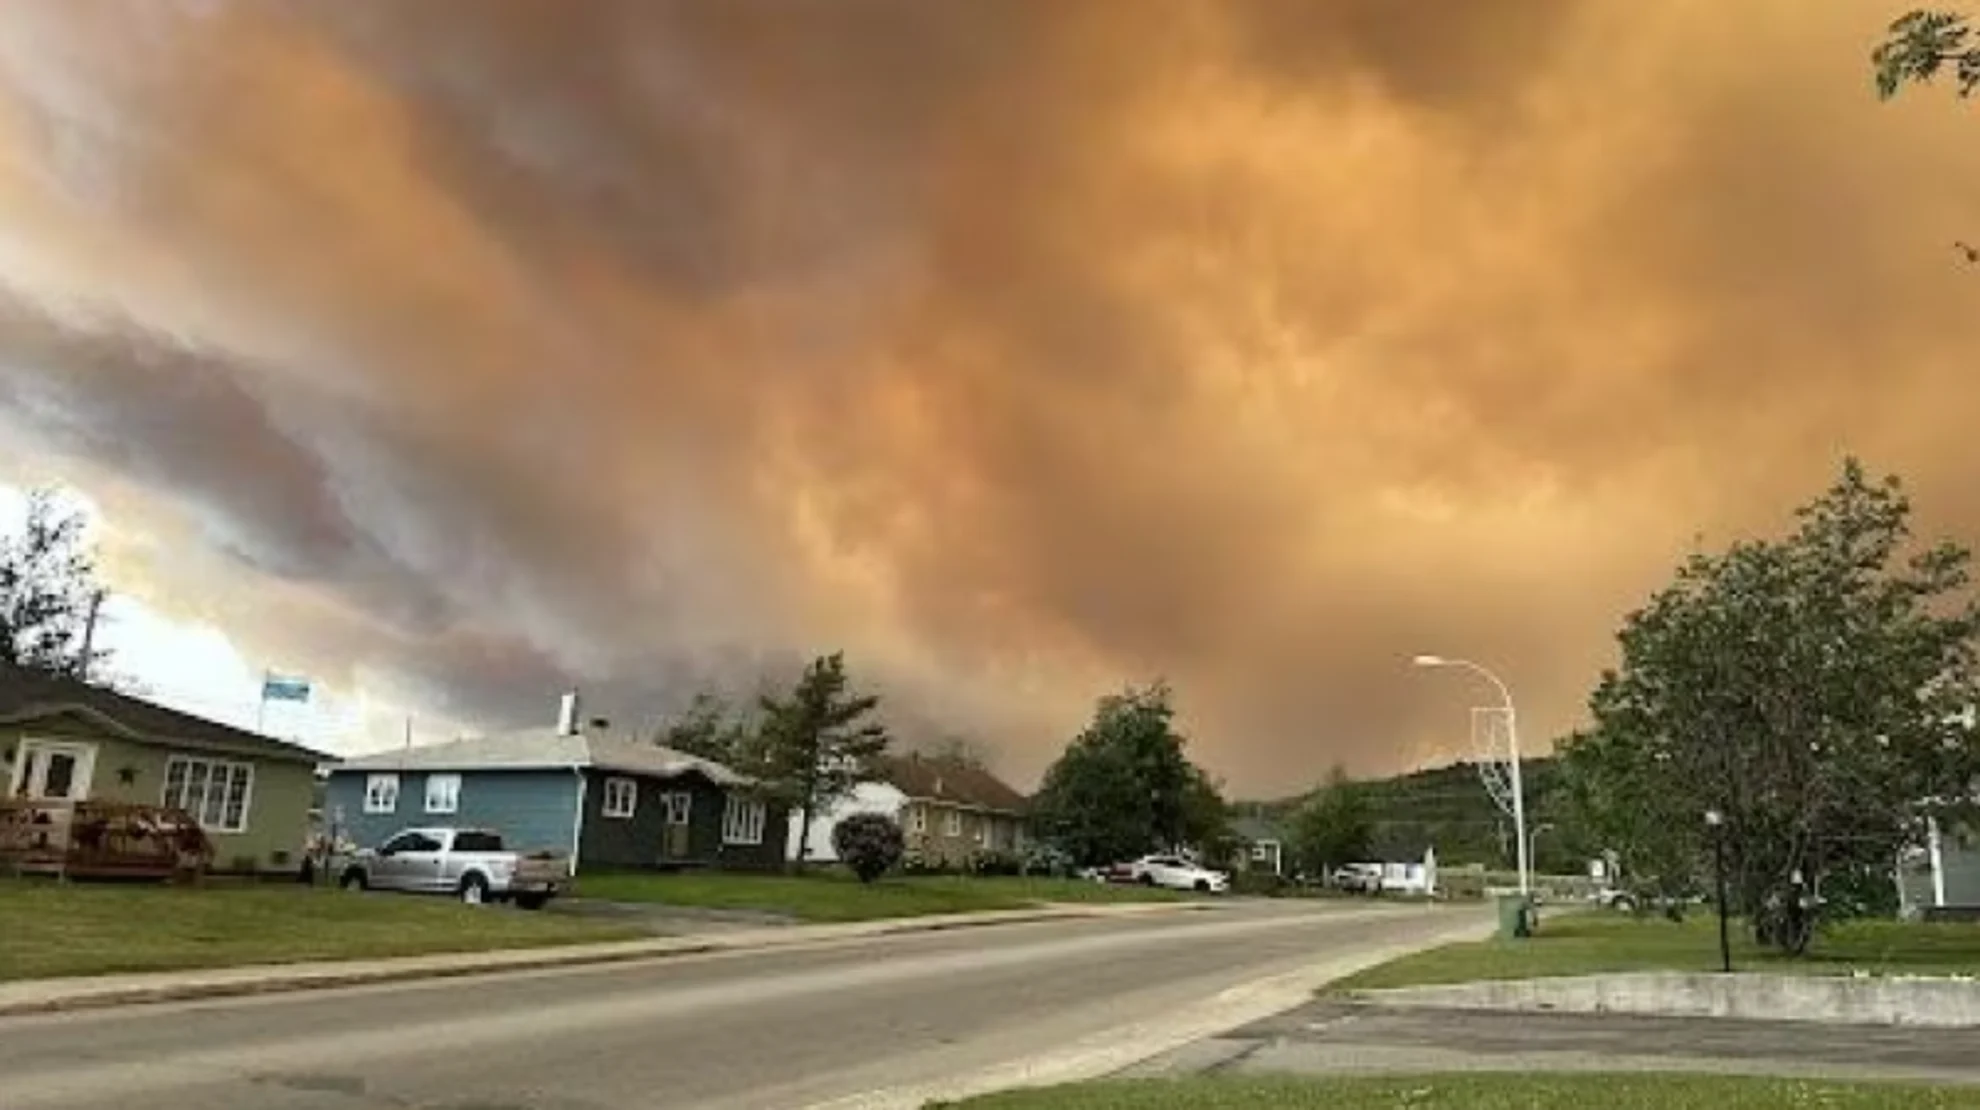 Rainfall helping water bombers fighting fire near Labrador City, says premier